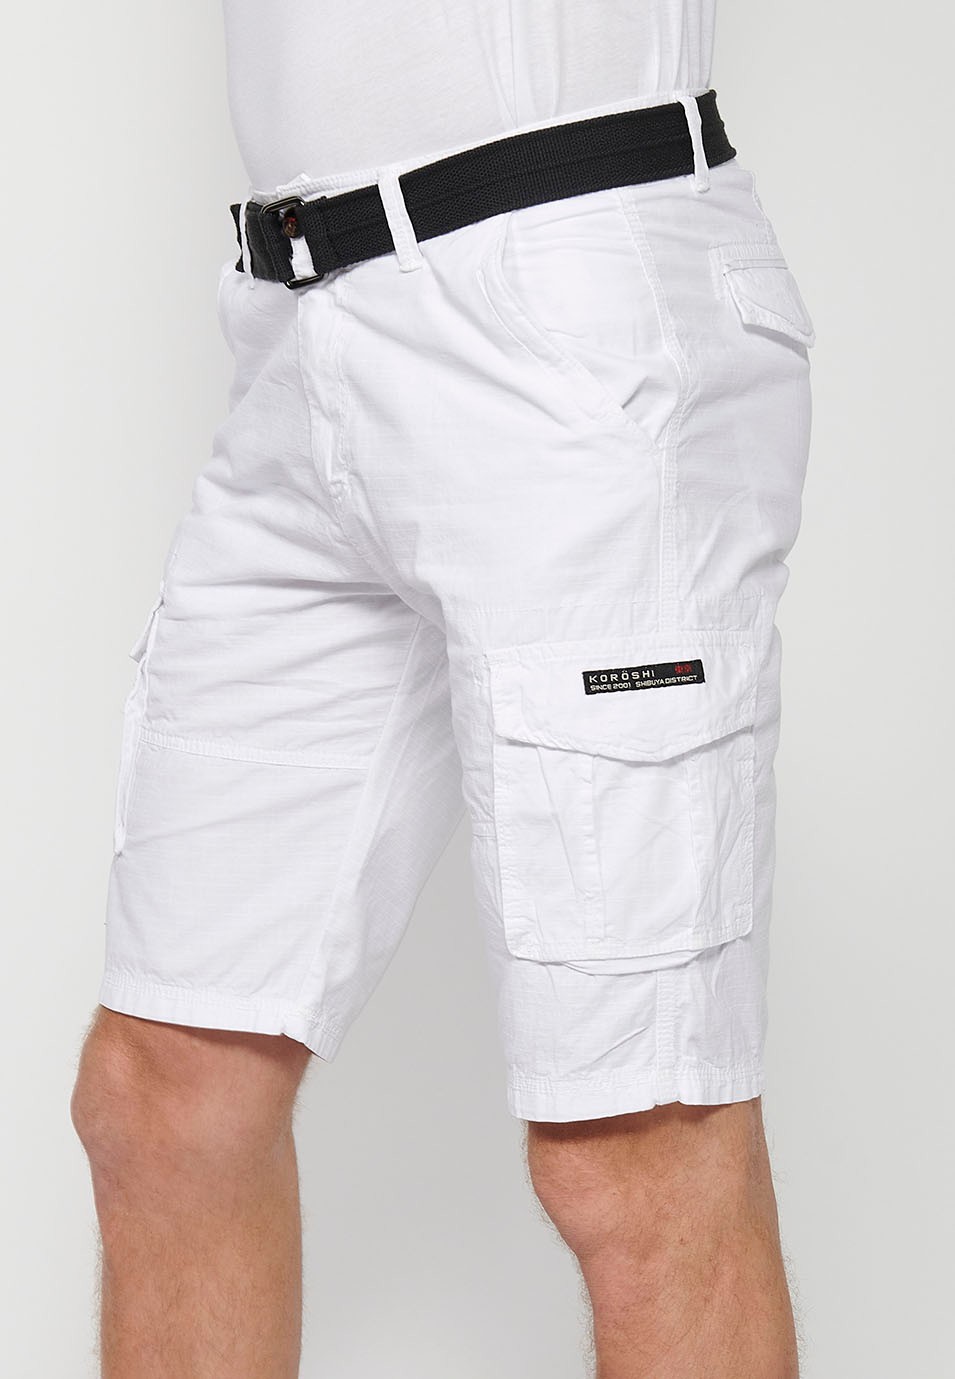 Cotton cargo shorts with belt and front closure with zipper and button with pockets, two back pockets with flap and two cargo pants in White for Men 1